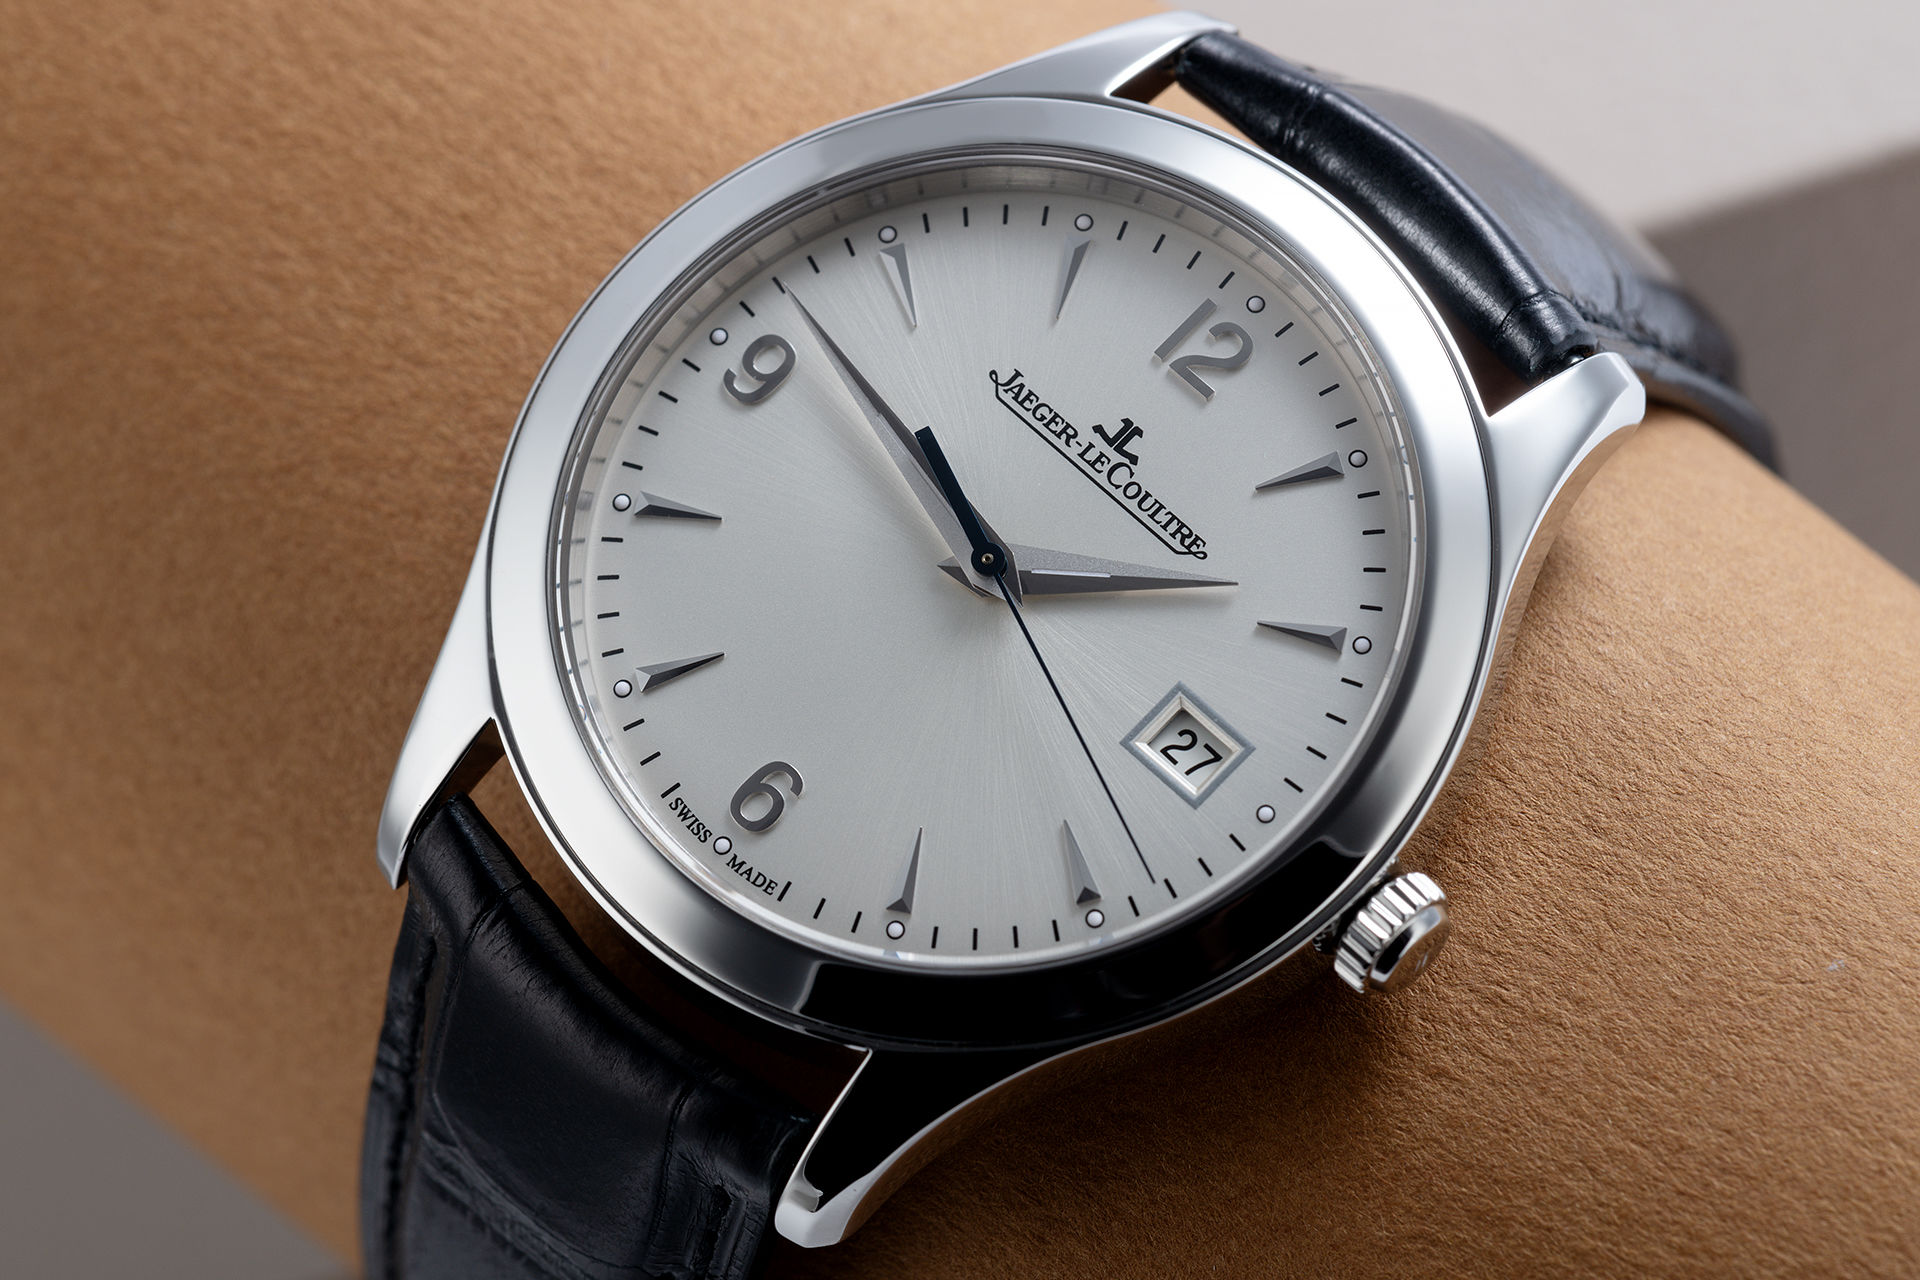 ref 176.8.40.S | Box and Paper | Jaeger-leCoultre Master Control